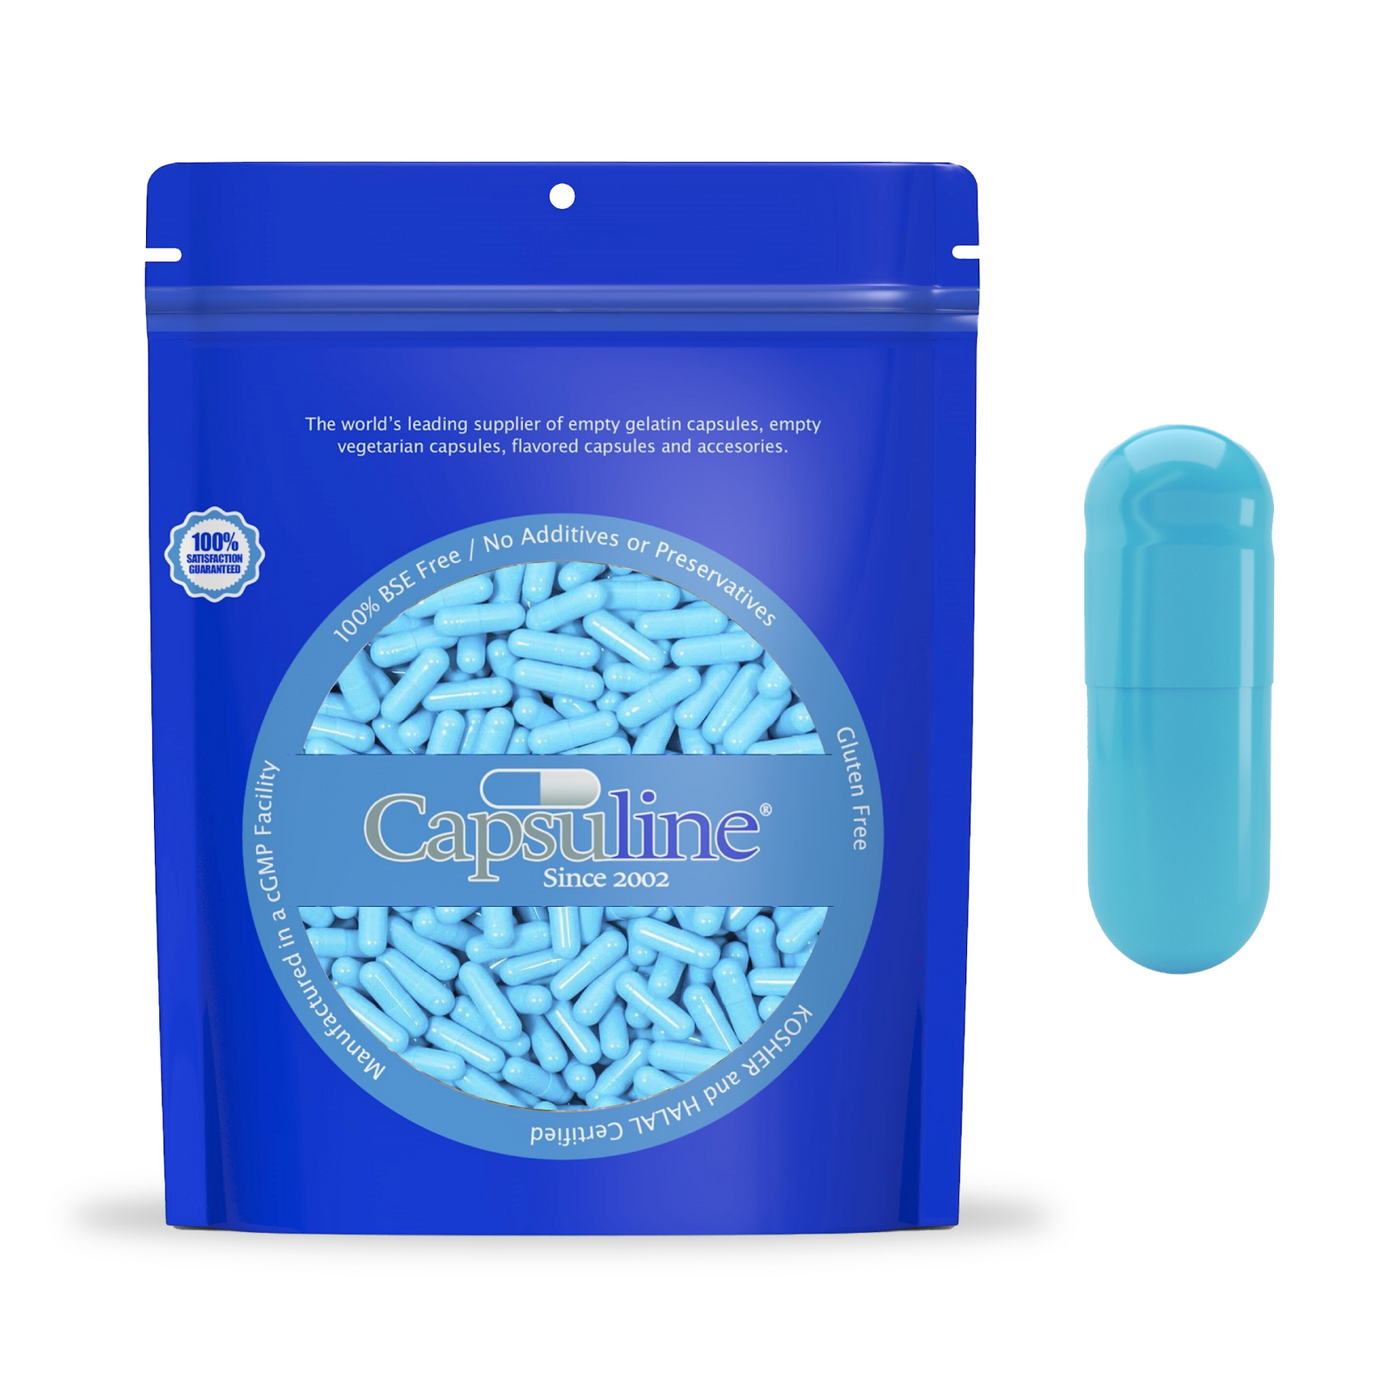 Colored Size 1 Empty Gelatin Capsules by Capsuline Blue/Blue